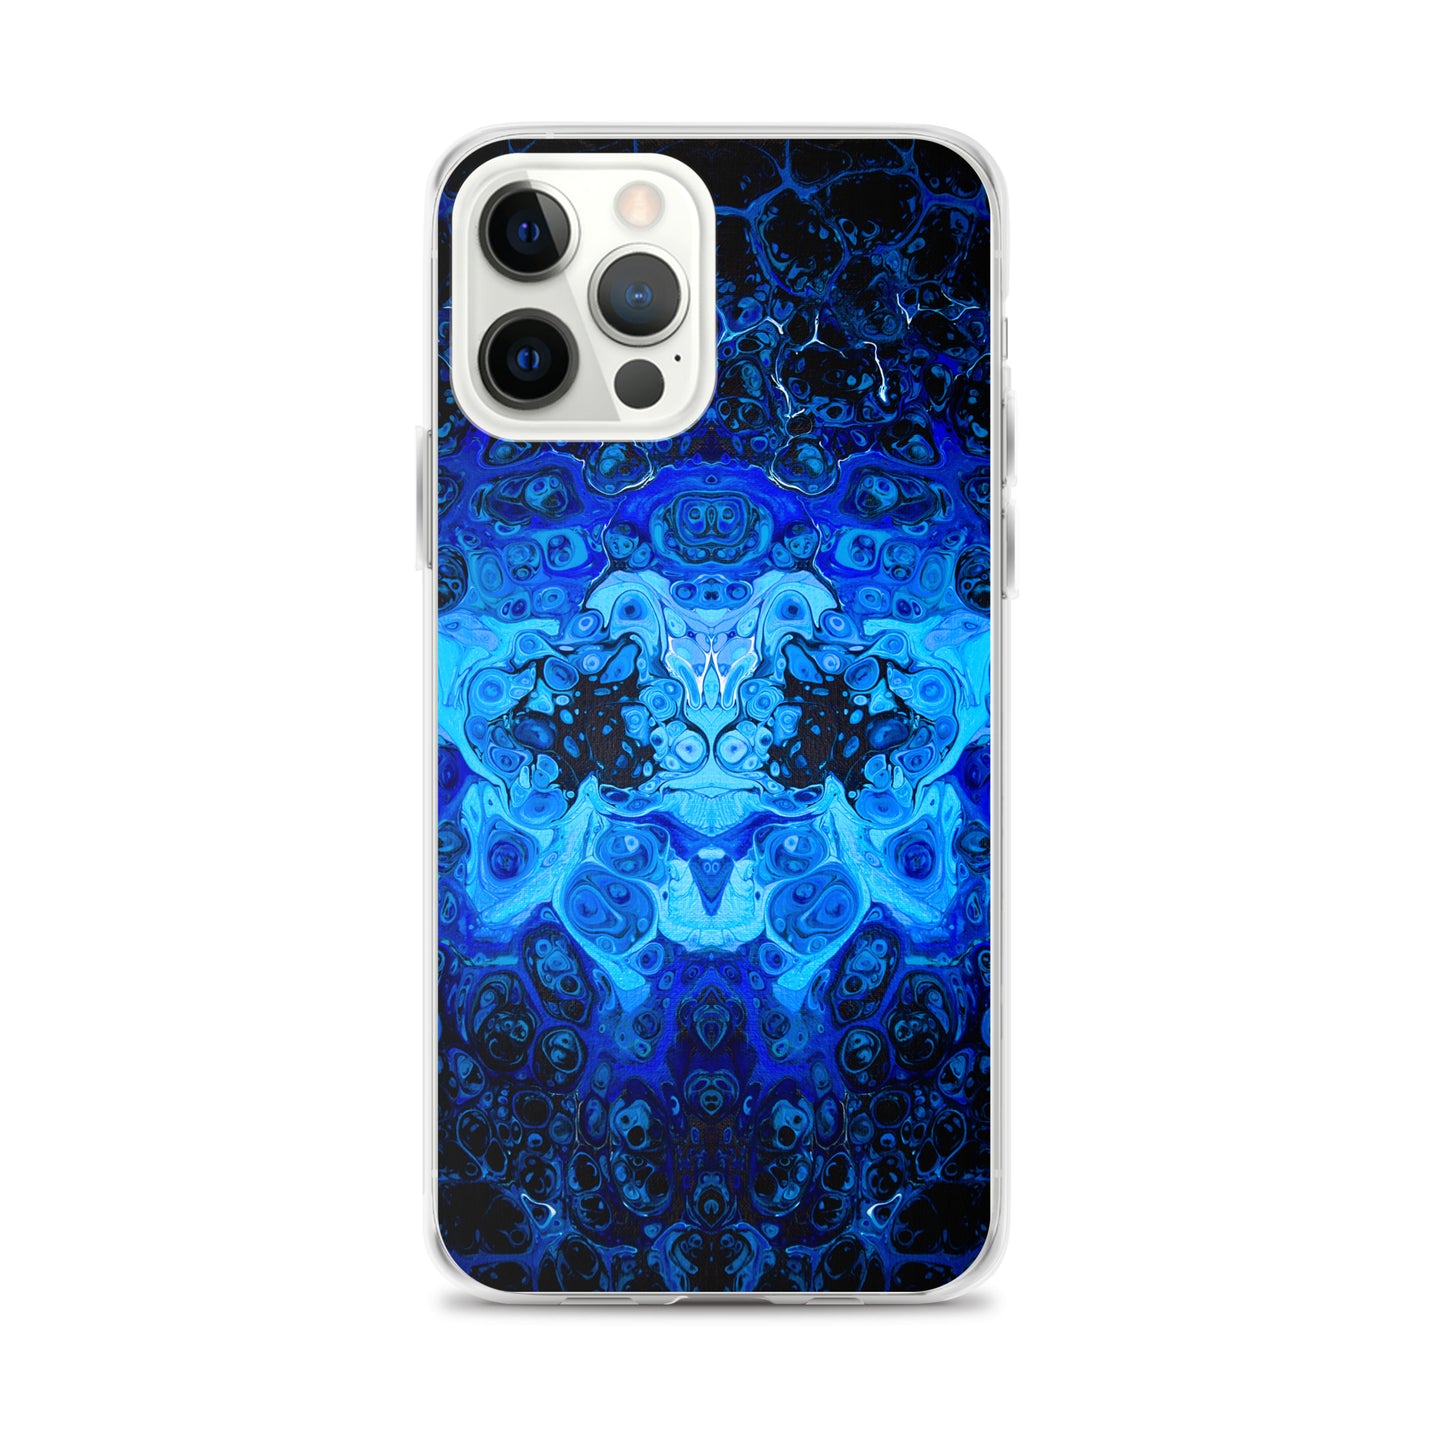 NightOwl Studio Custom Phone Case Compatible with iPhone, Ultra Slim Cover with Heavy Duty Scratch Resistant Shockproof Protection, Blue Bliss